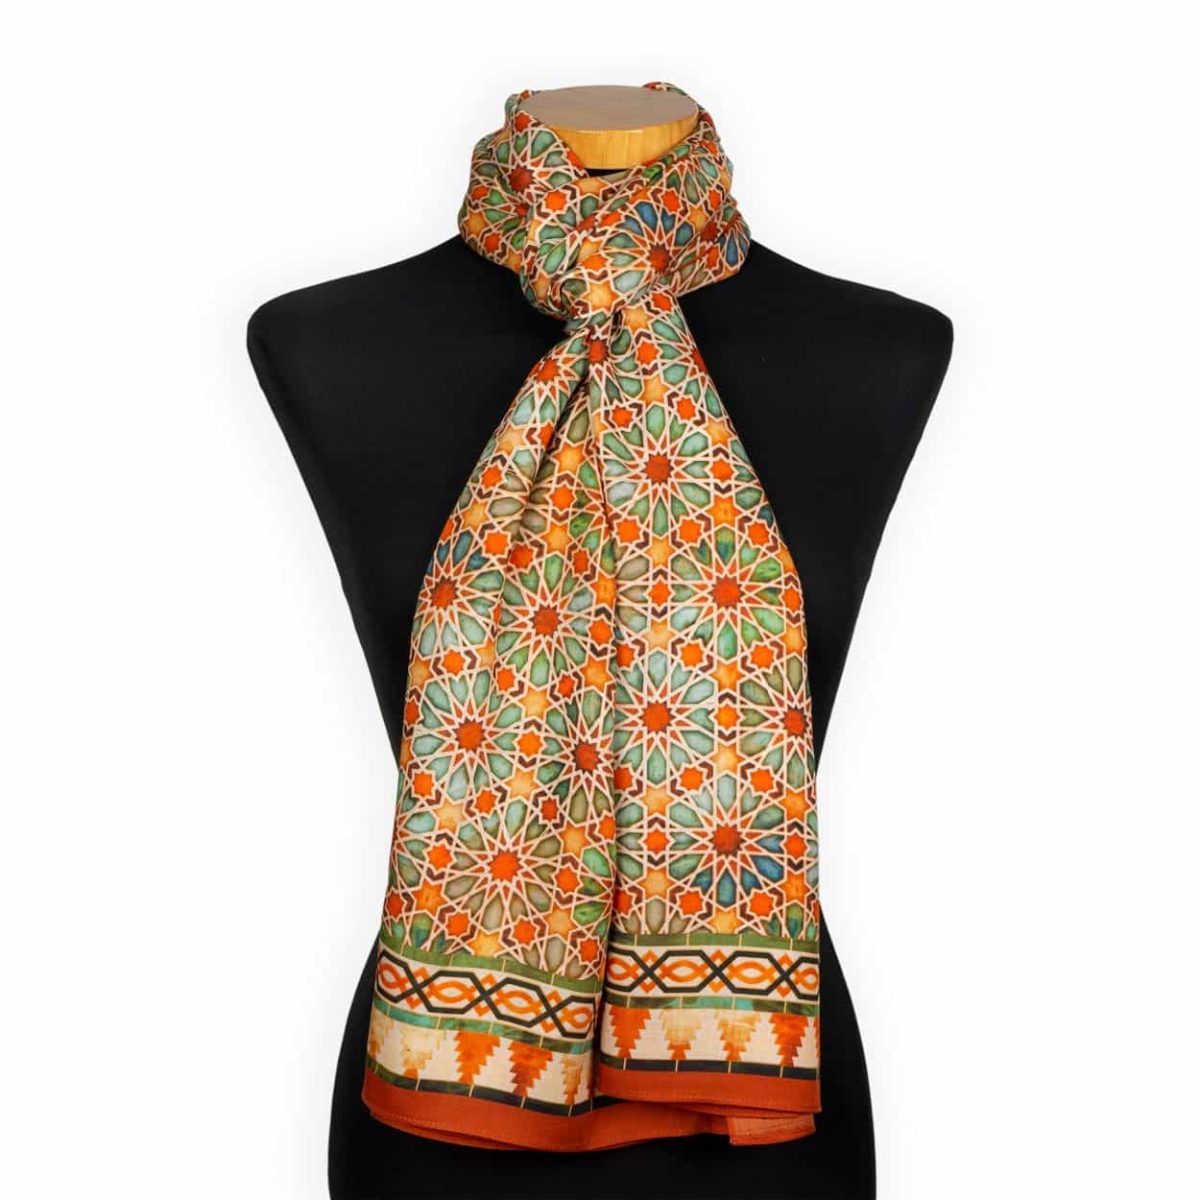 Large neck scarf with orange print featuring Islamic art pattern